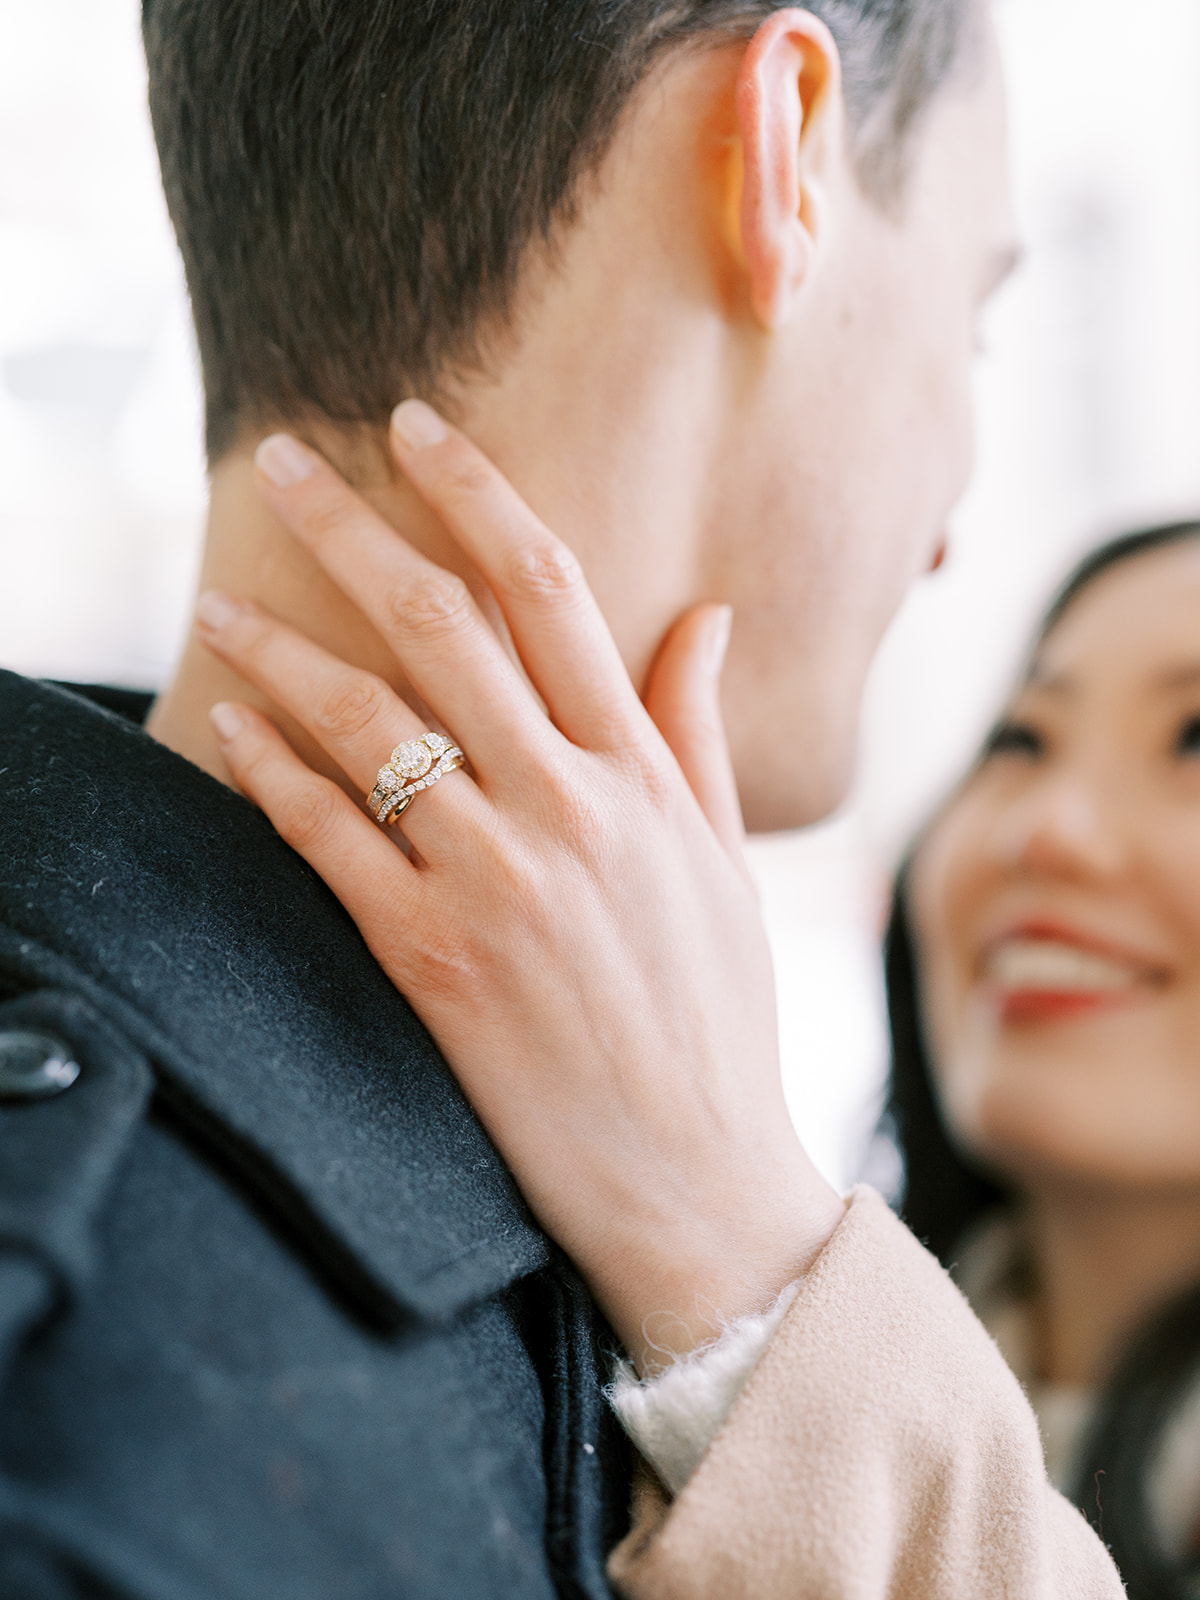 Bride shows off her engagement ring in this cute engagement session pose